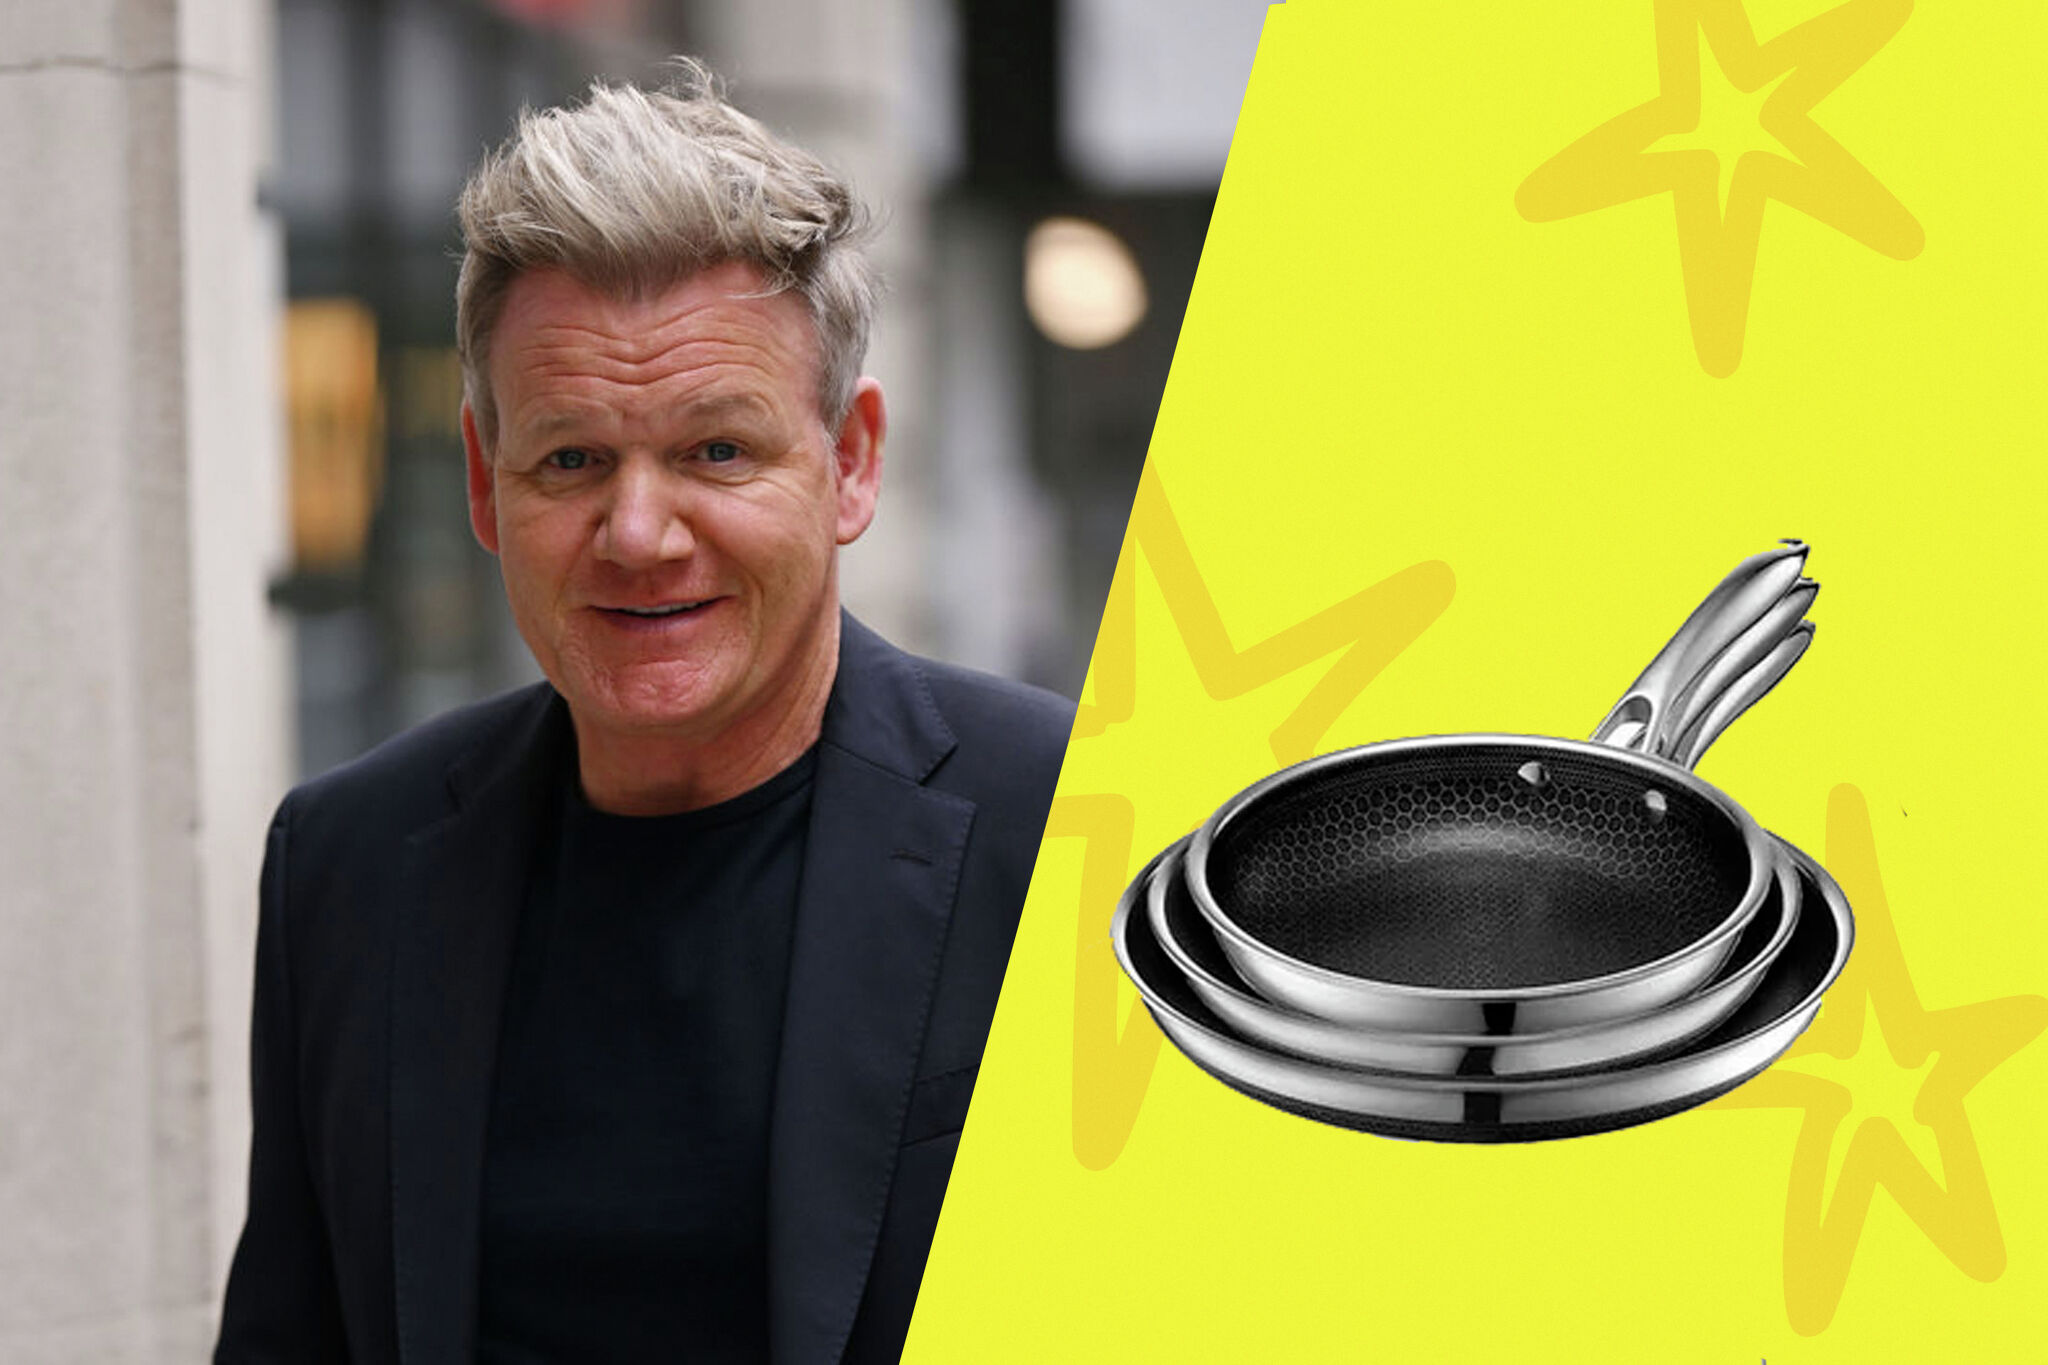 HexClad Cyber Monday cookware sale: Grab Gordon Ramsay-approved pots and  pans - Reviewed